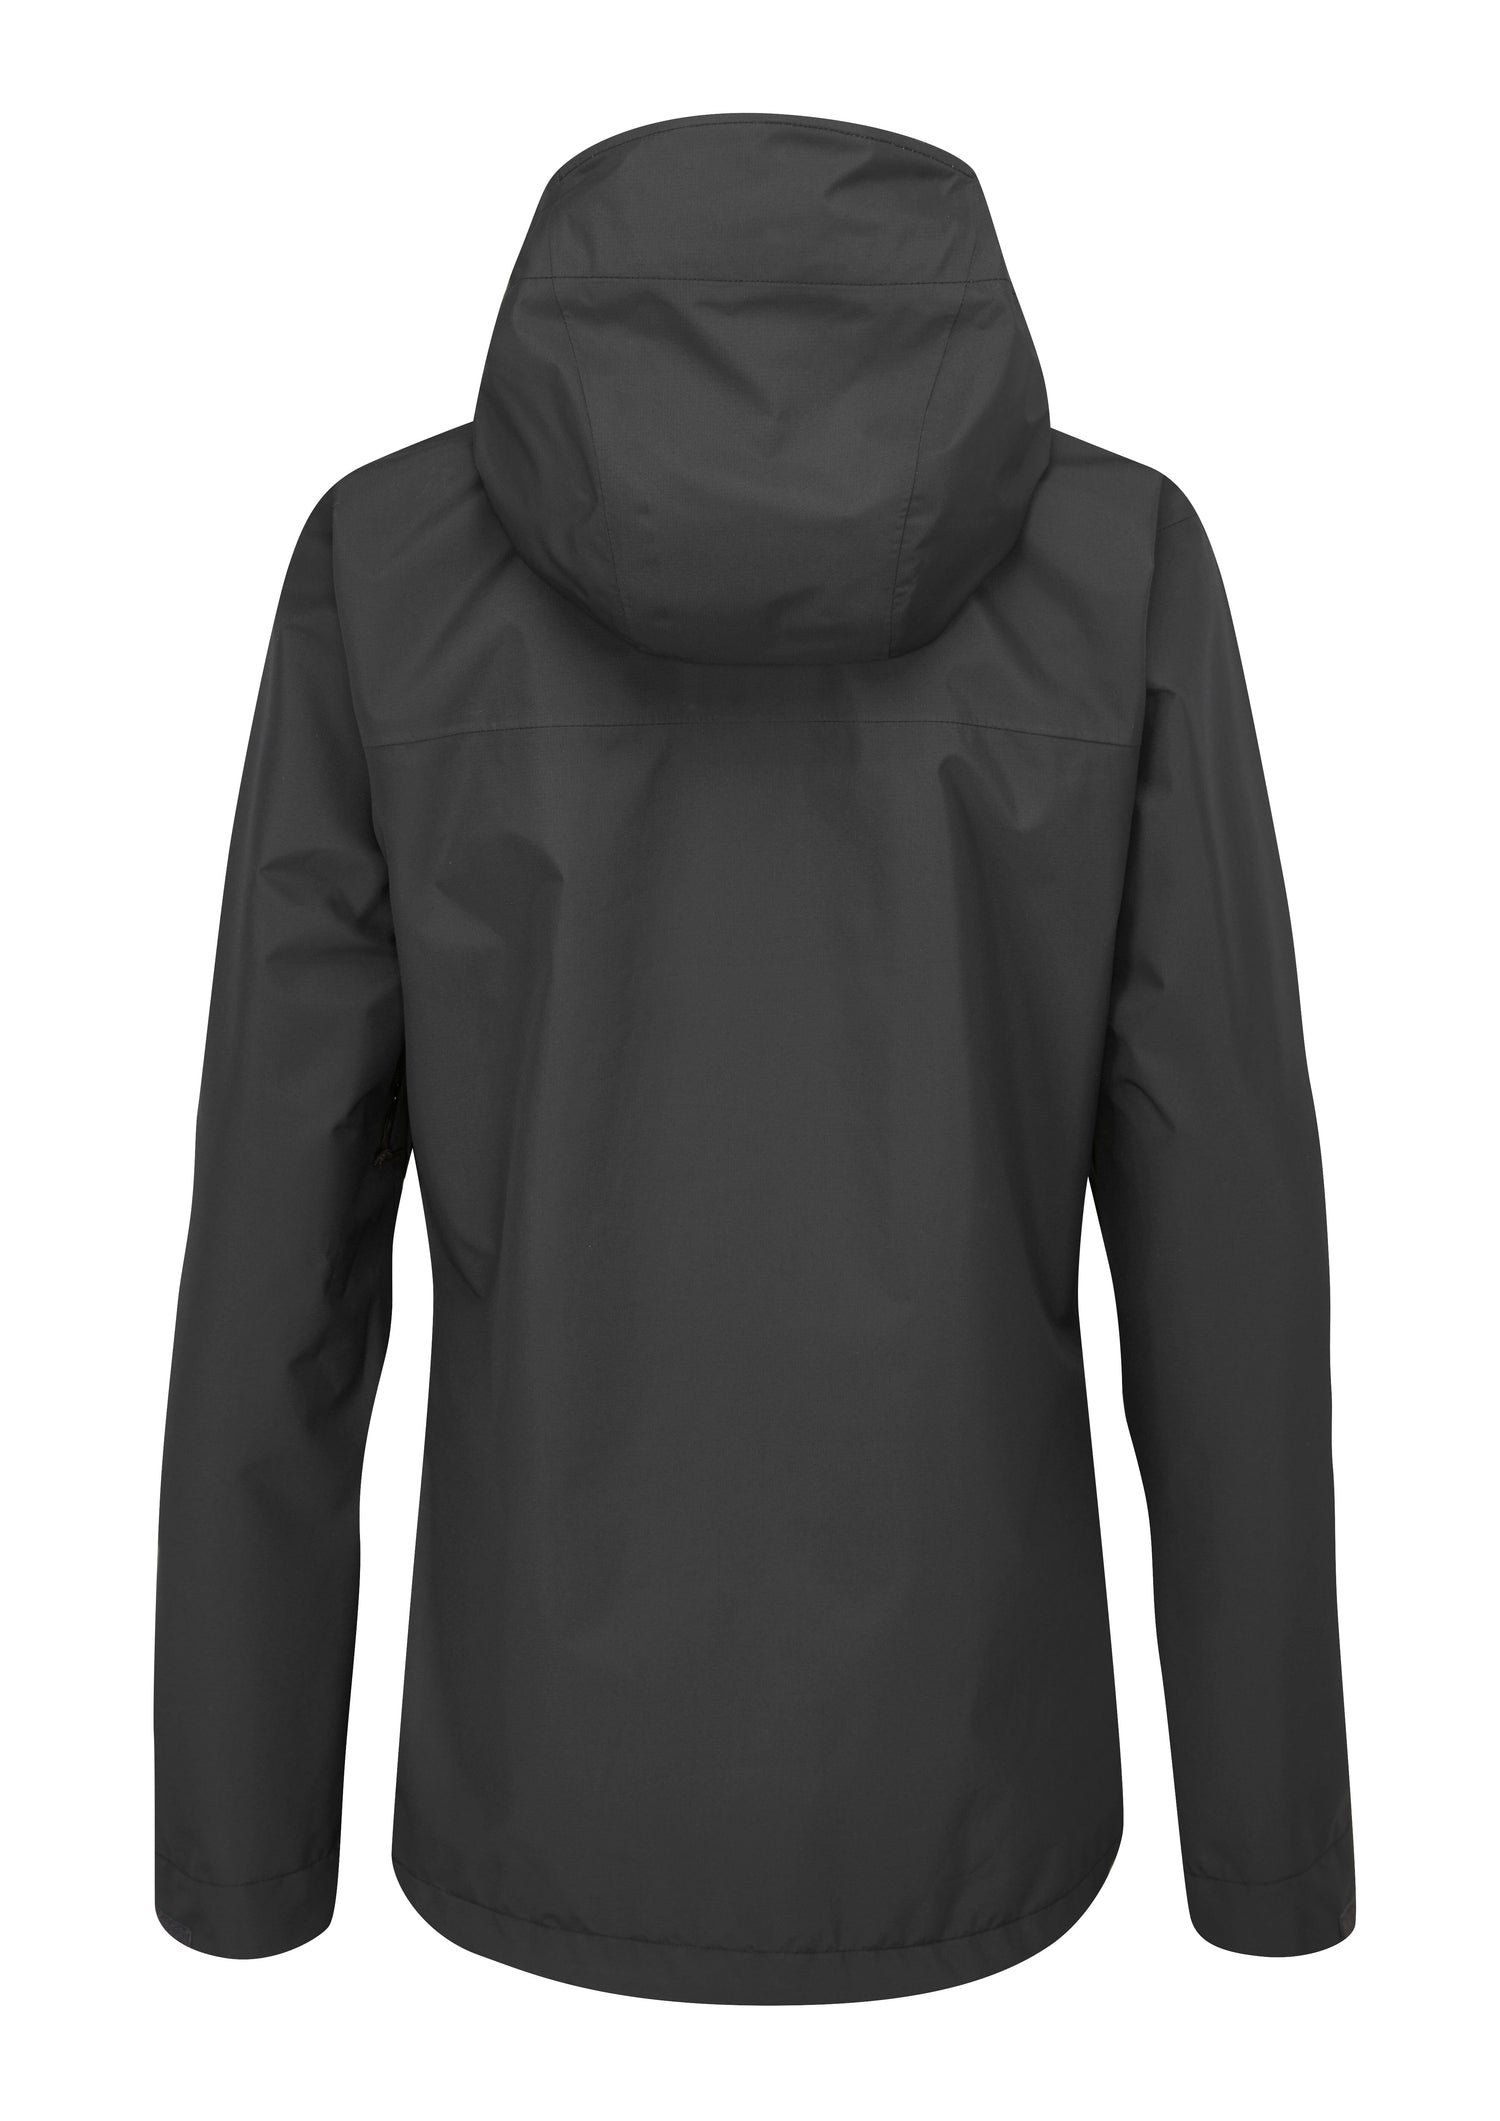 Rab W's Downpour Eco Jacket - Recycled polyester Black Jacket